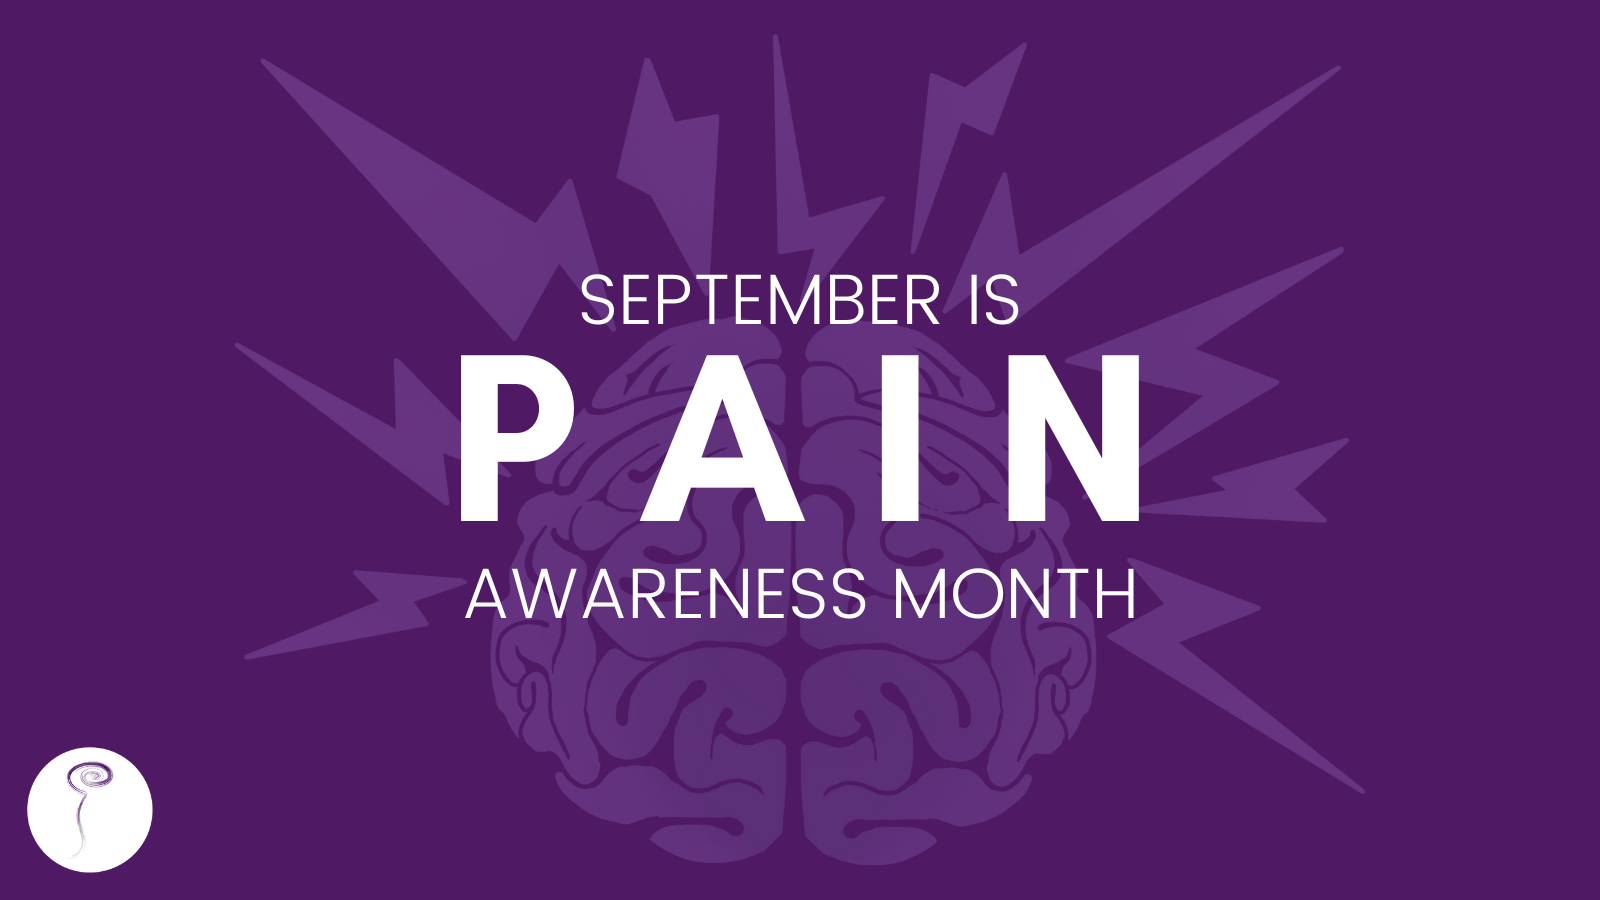 A purple background with a light purple image of a brain surrounded by zaps indicating pain, with text that says "September is pain awareness month"